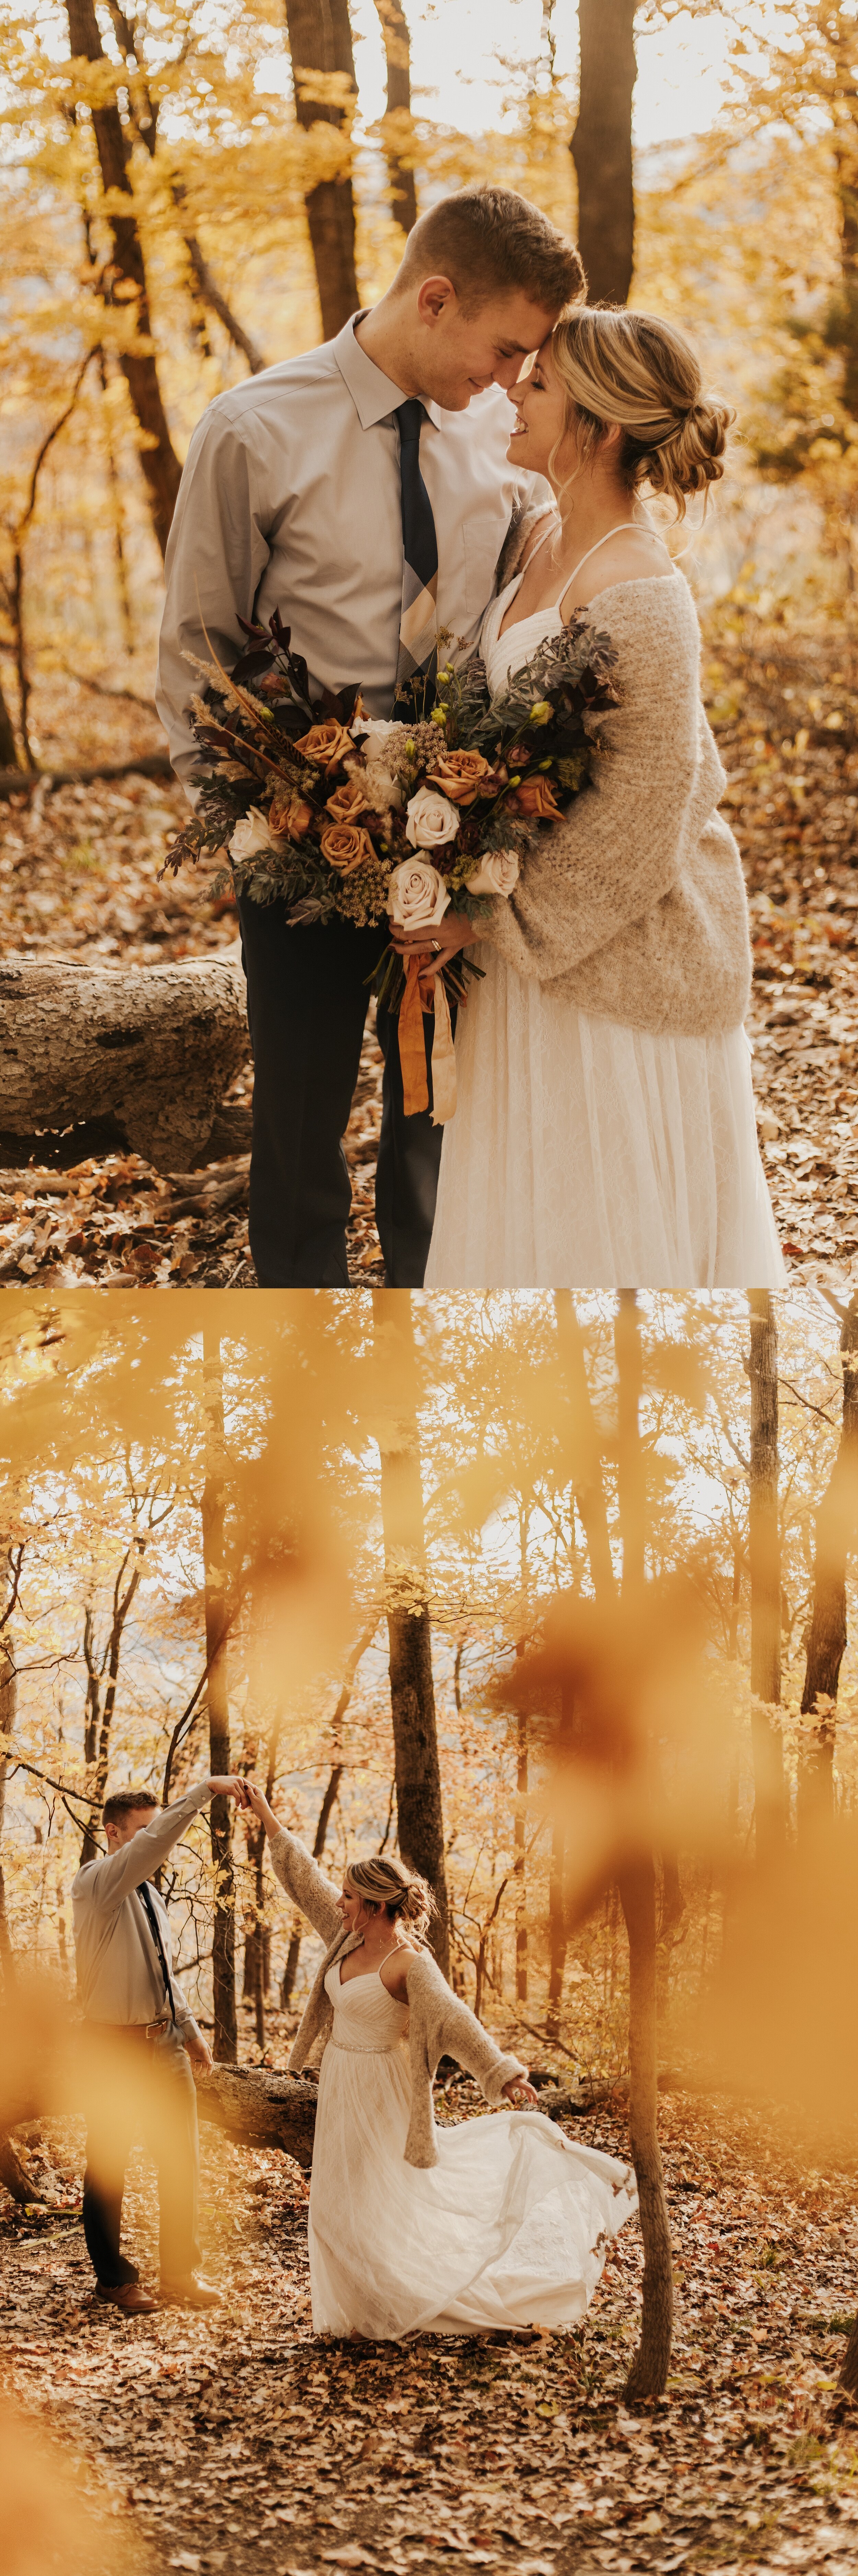 jessika-christine-photography-elopement-couples-outdoor-adventurous-session (17).jpg